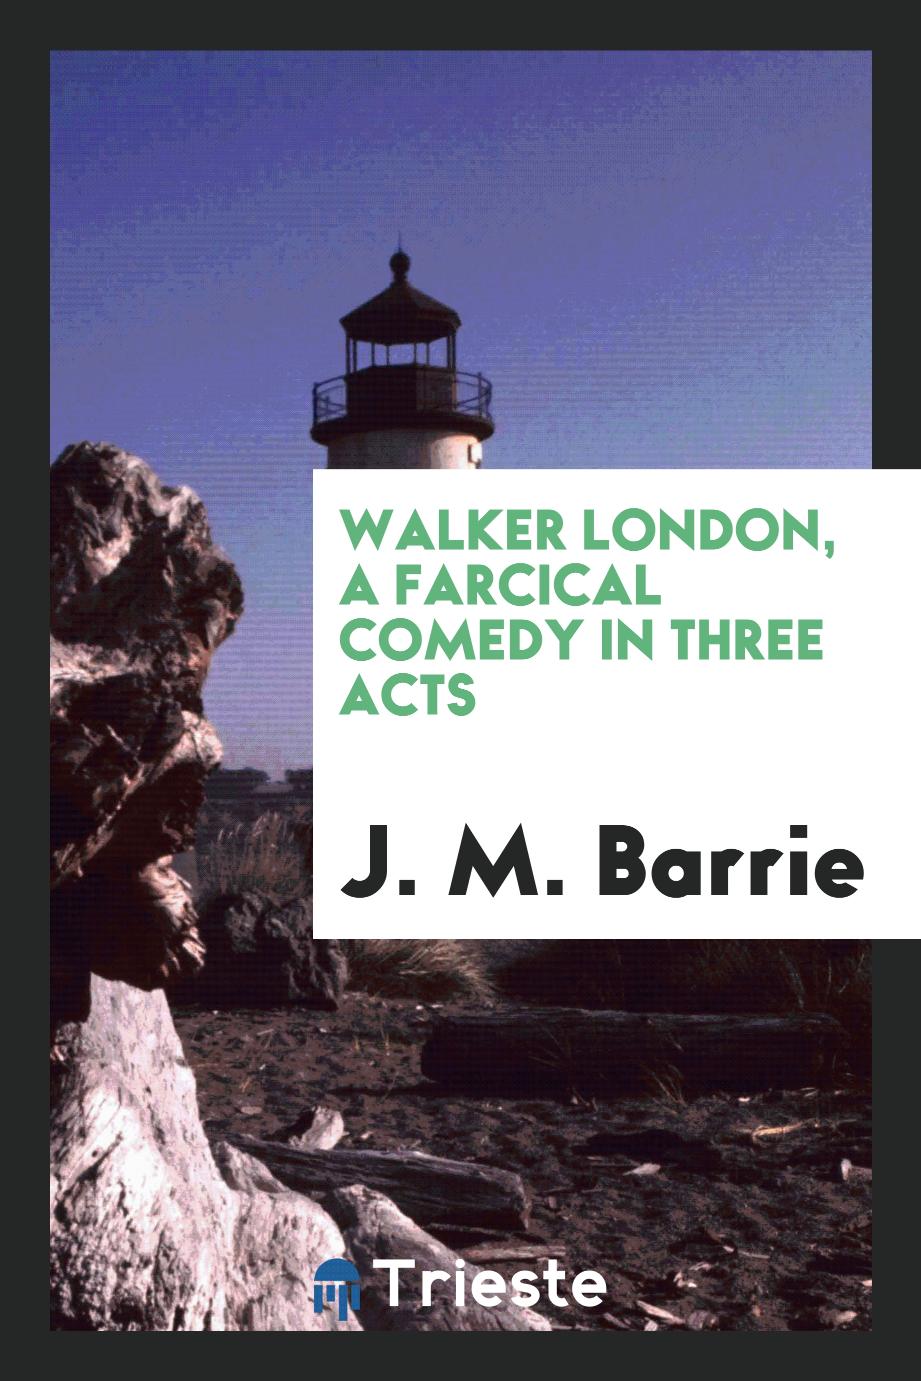 Walker London, a Farcical Comedy in Three Acts